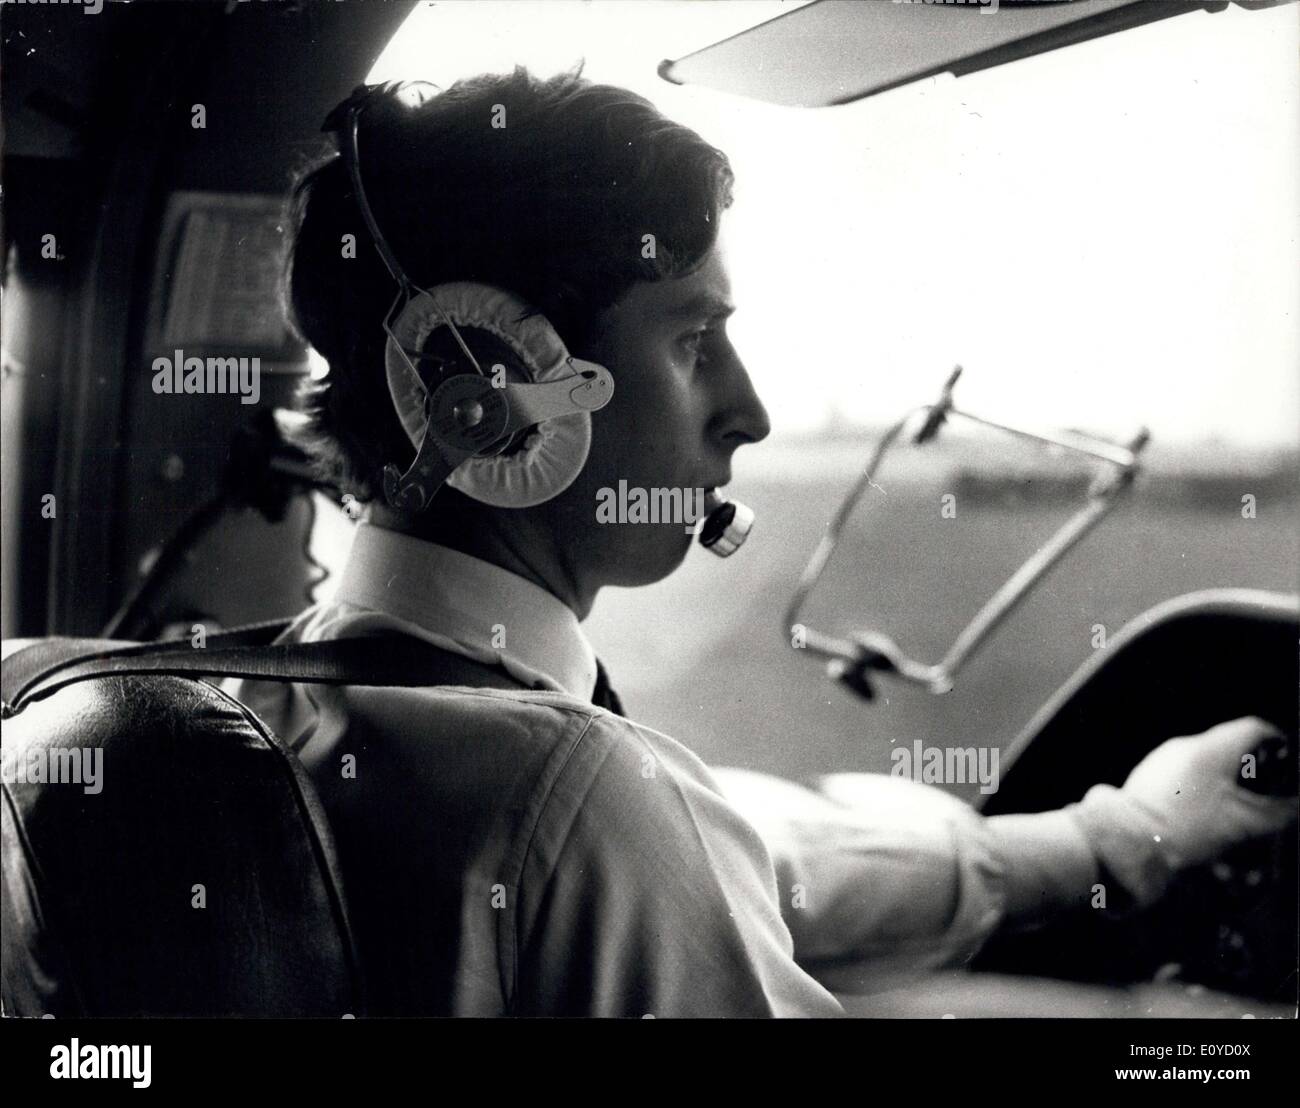 Nov. 14, 1969 - When it came to choosing where his 21st Birthday pictures were to be taken , the Prince of Wales choose RAF Oakington, where he is learning to fly under the instruction of Squadron Leader Phillip Pinney. the Prince, who will be 21 on Friday, November 14th, is now flying a twin engine Basset aircraft. Photo Shows: The Prince of Wales lying the Basset aircraft. Stock Photo